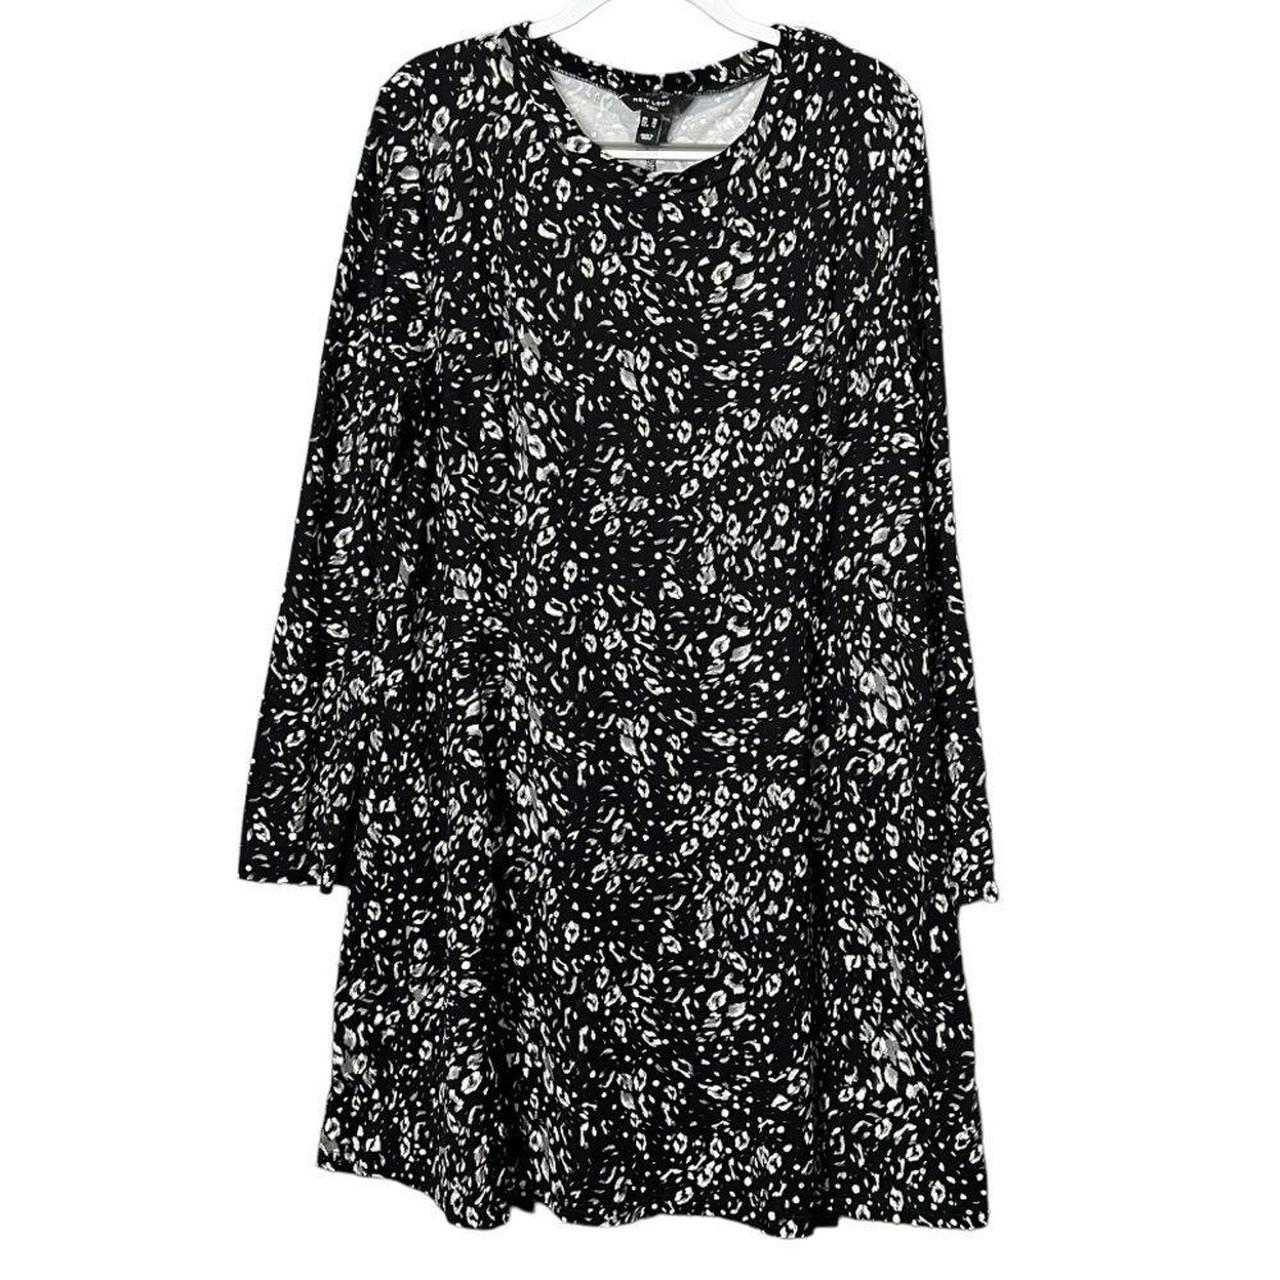 New Look Women's Black and Grey Dress